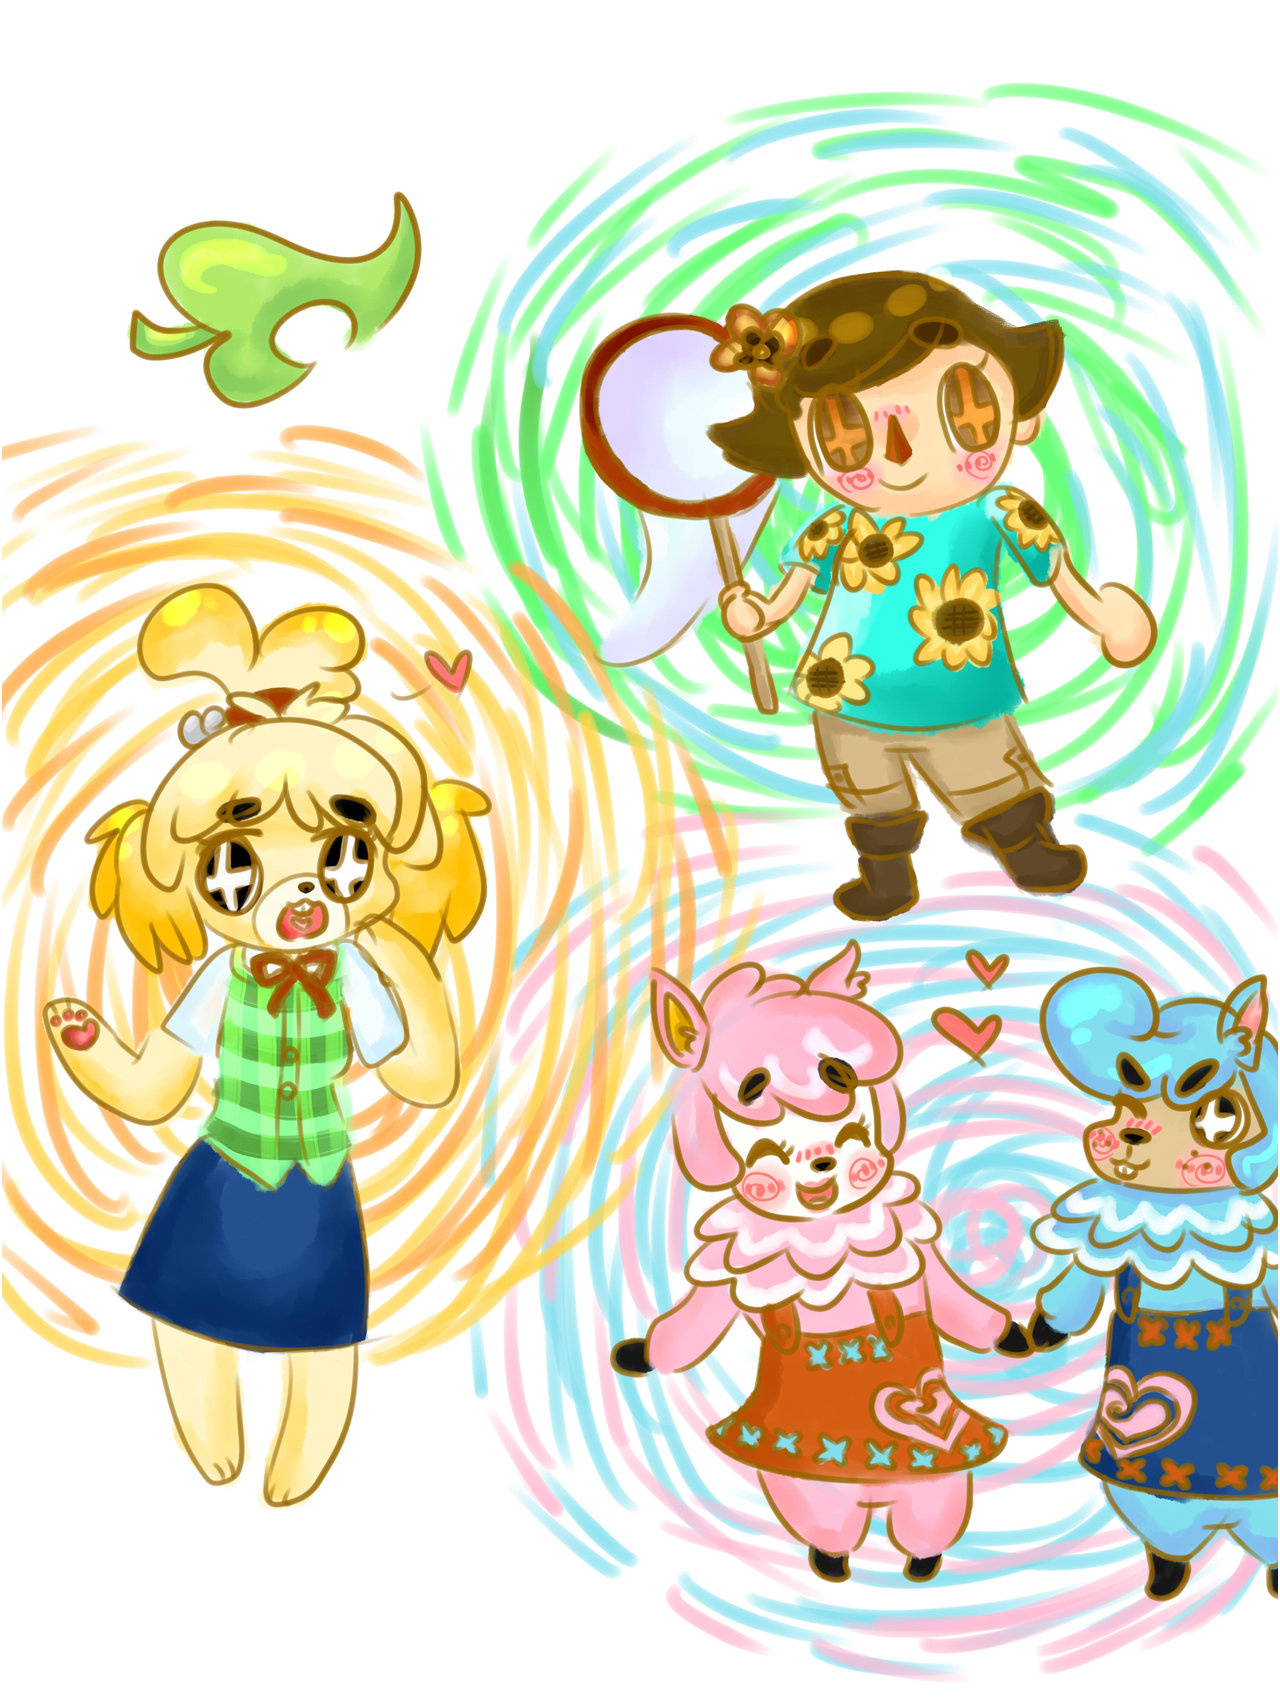 Coloriage Animal Crossing Inspiration Acnl Doodles by Kittykathats On Deviantart